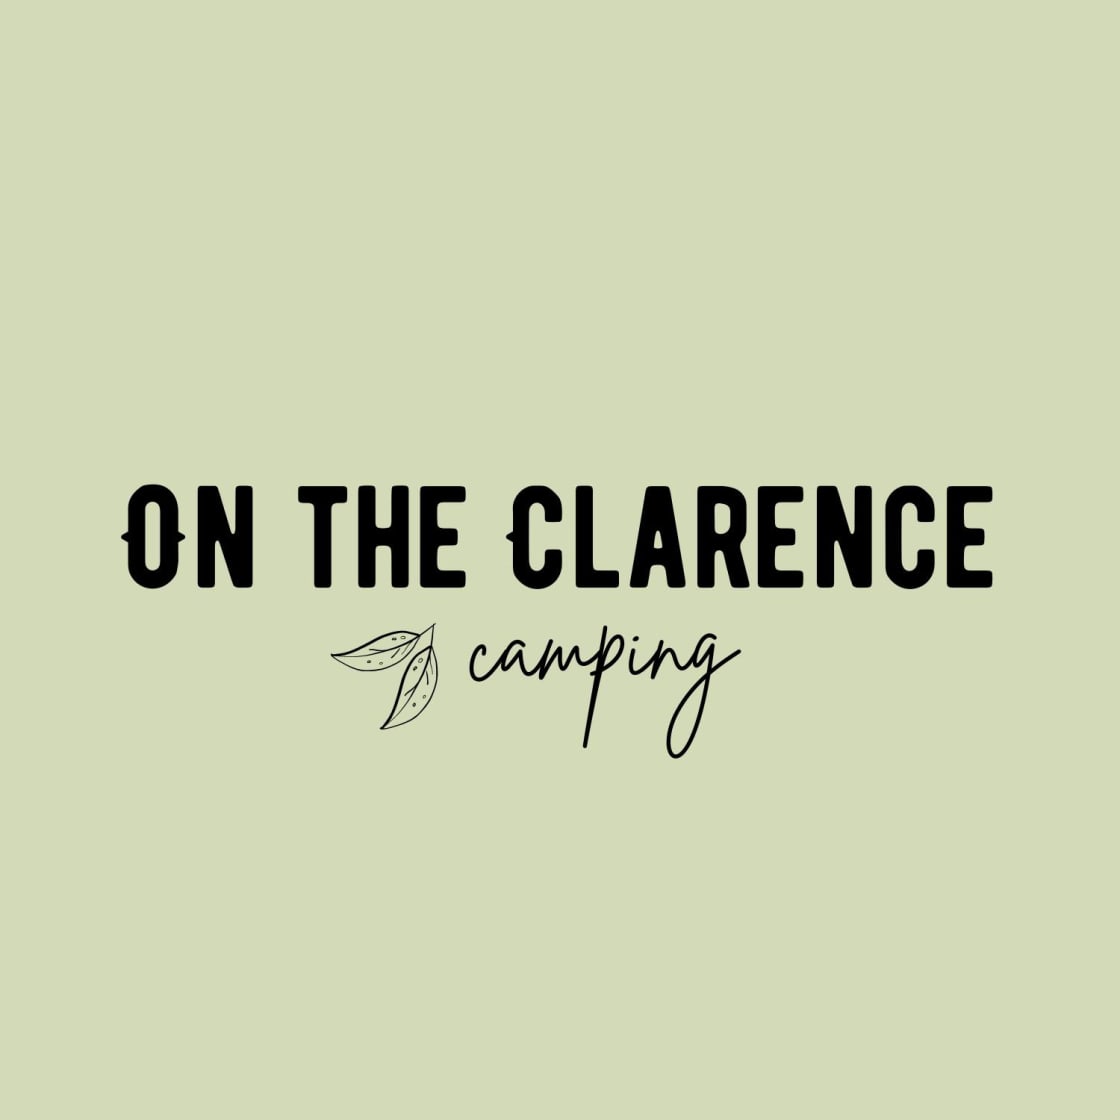 On the Clarence Camping